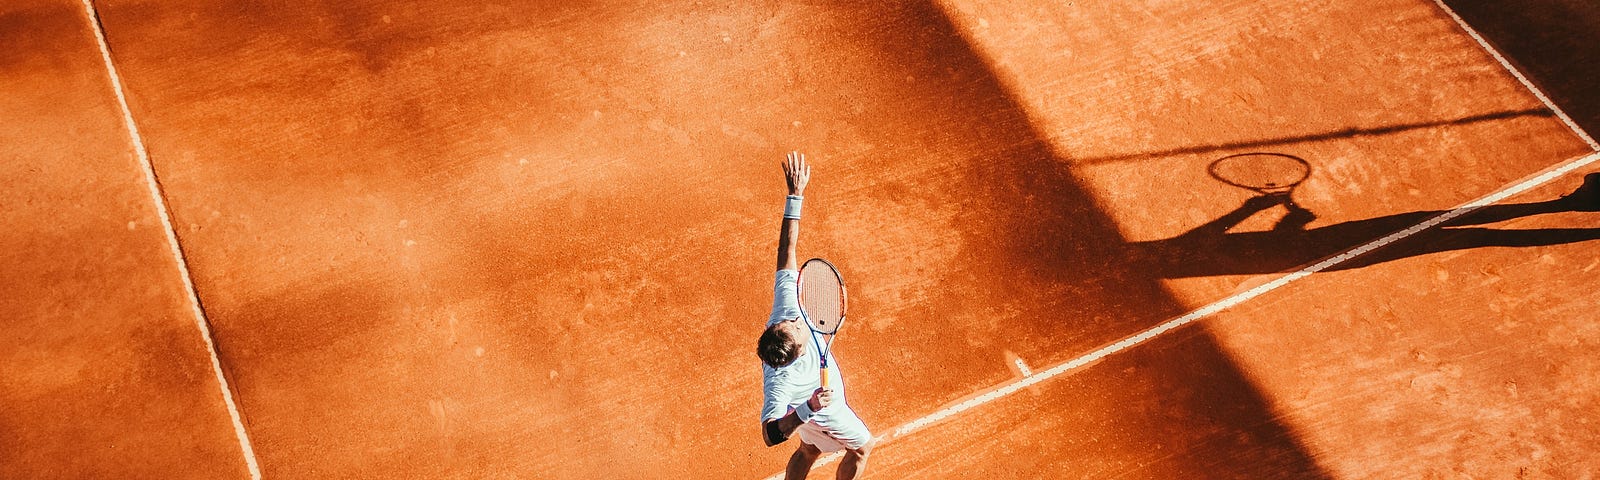 A person playing tennis on an orange court.